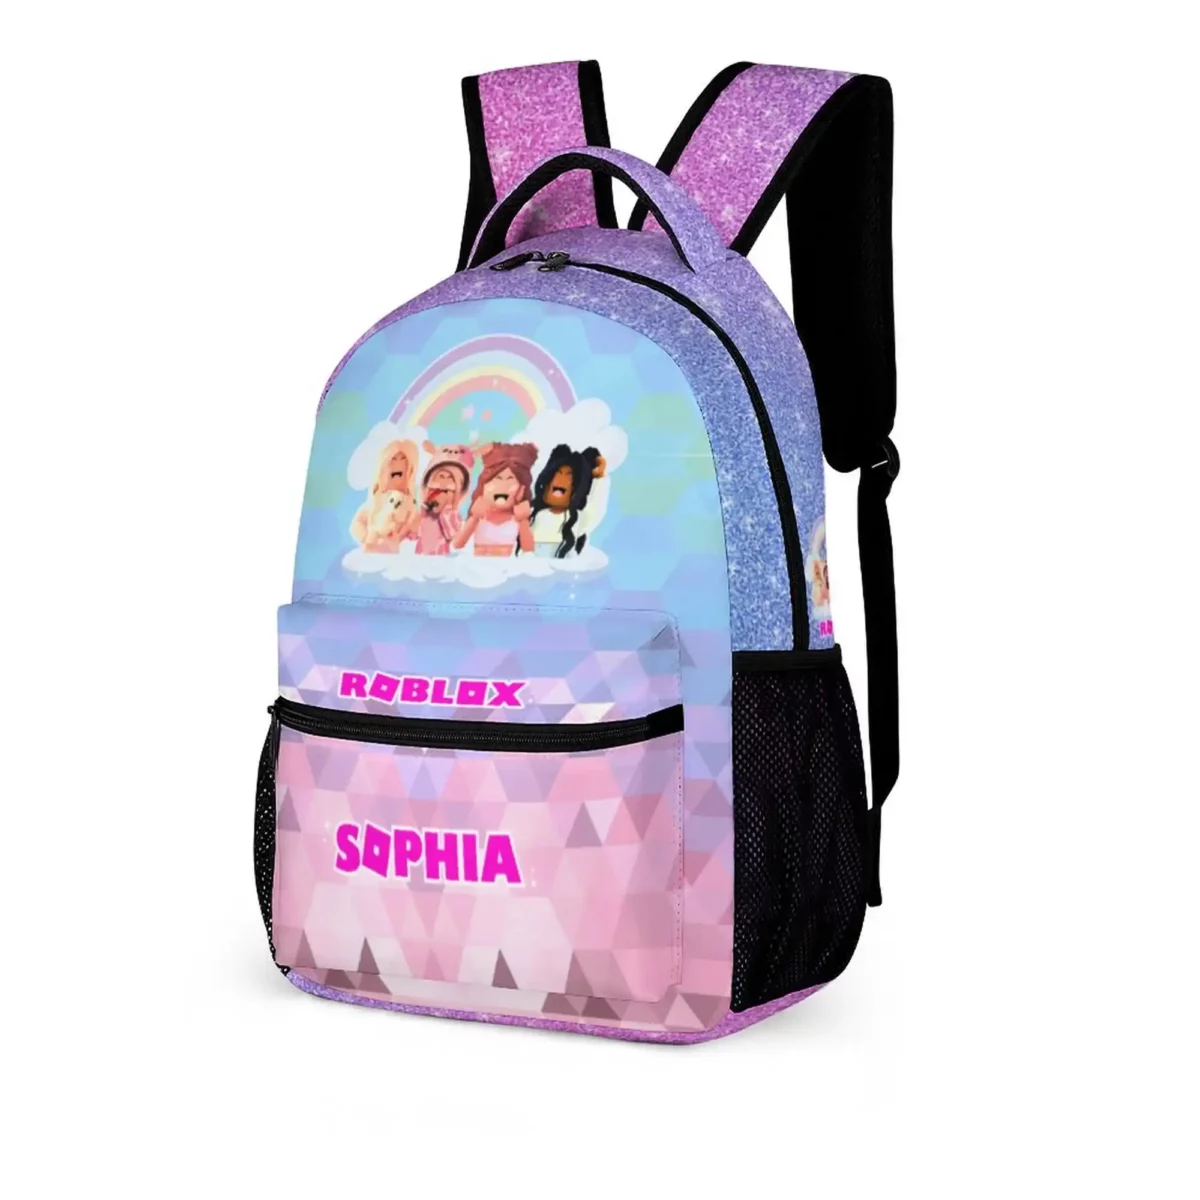 Geometric Pink and Purple, Roblox Avatars Girls Backpack with Customizable Name Cool Kiddo 10